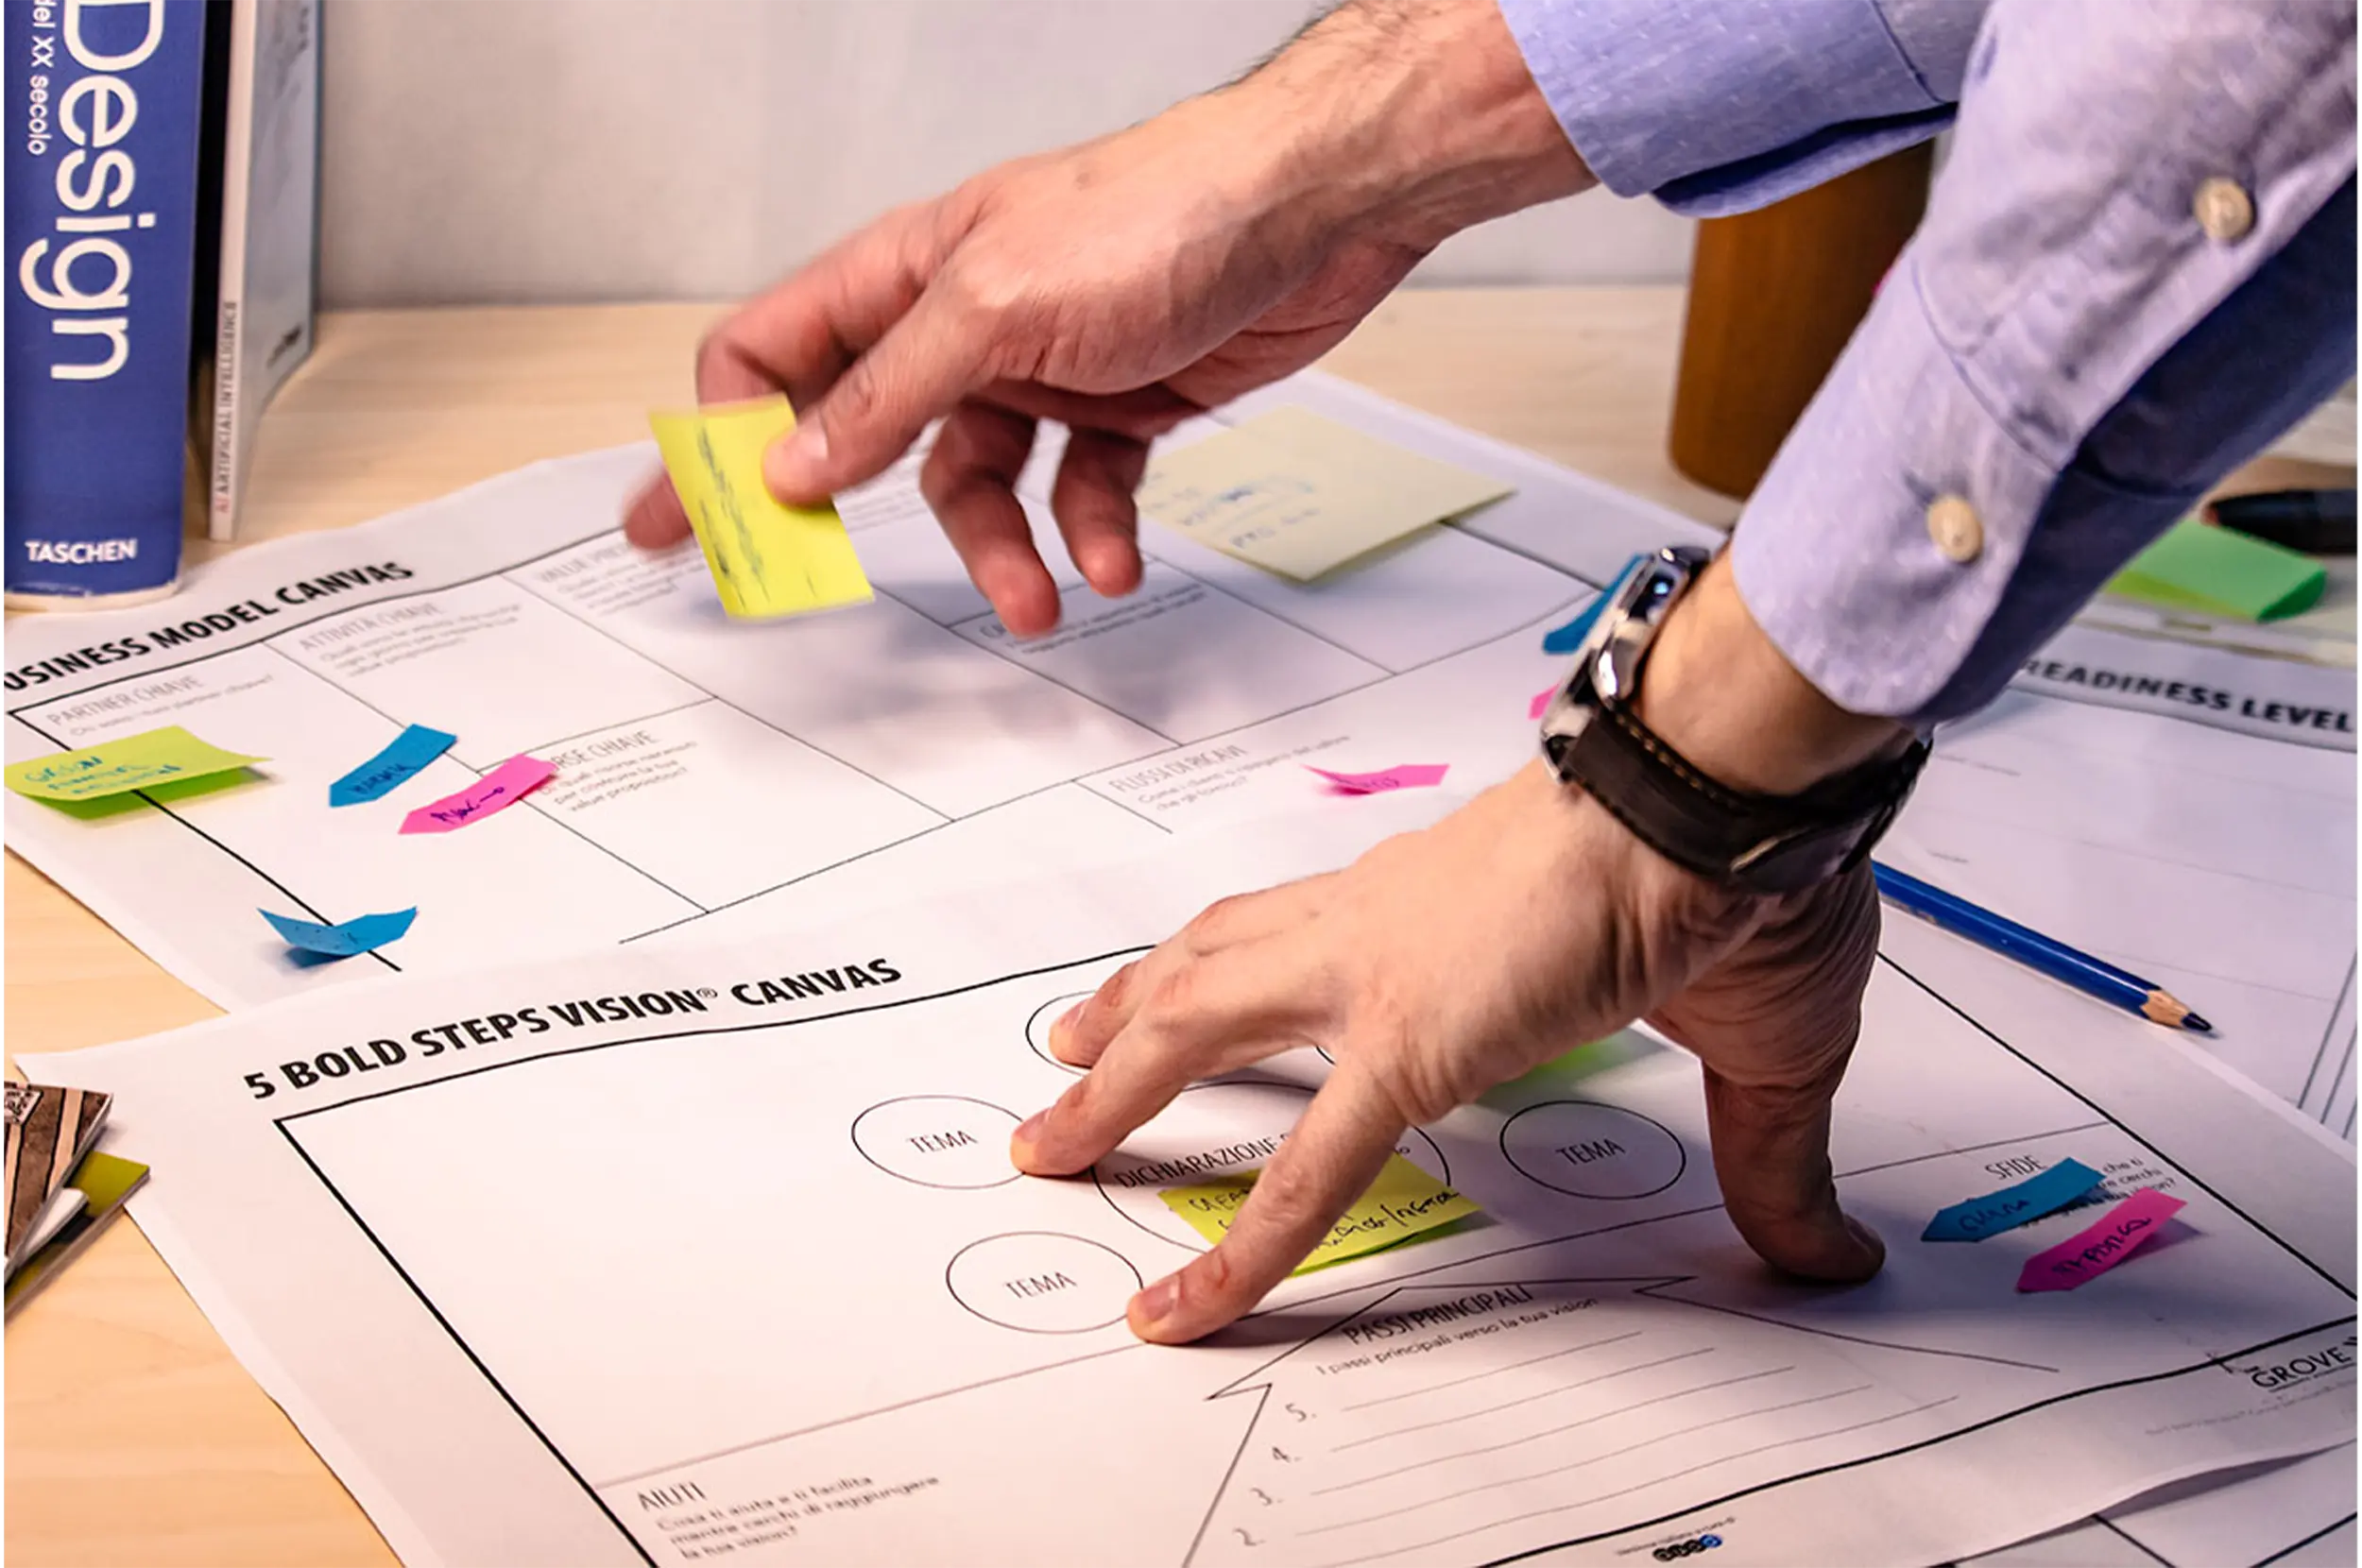 Service Design services: from user personas to design thinking